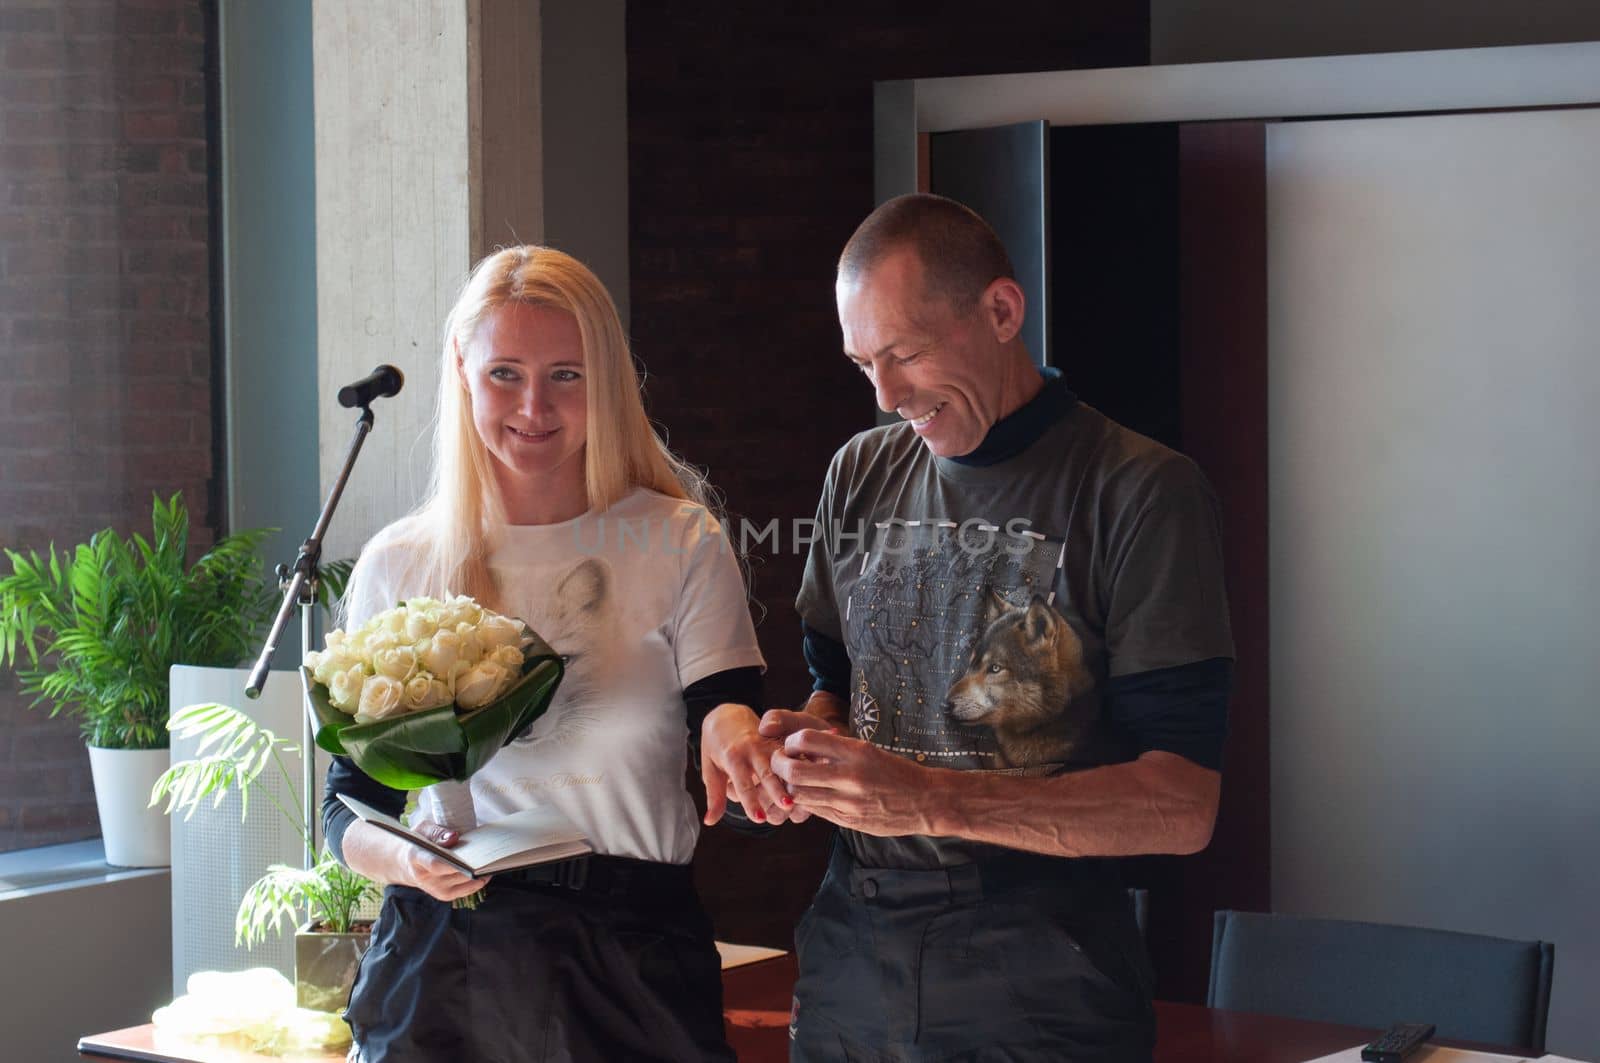 couple of motorbikers marry wedding, groom wears a ring to the bride by KaterinaDalemans